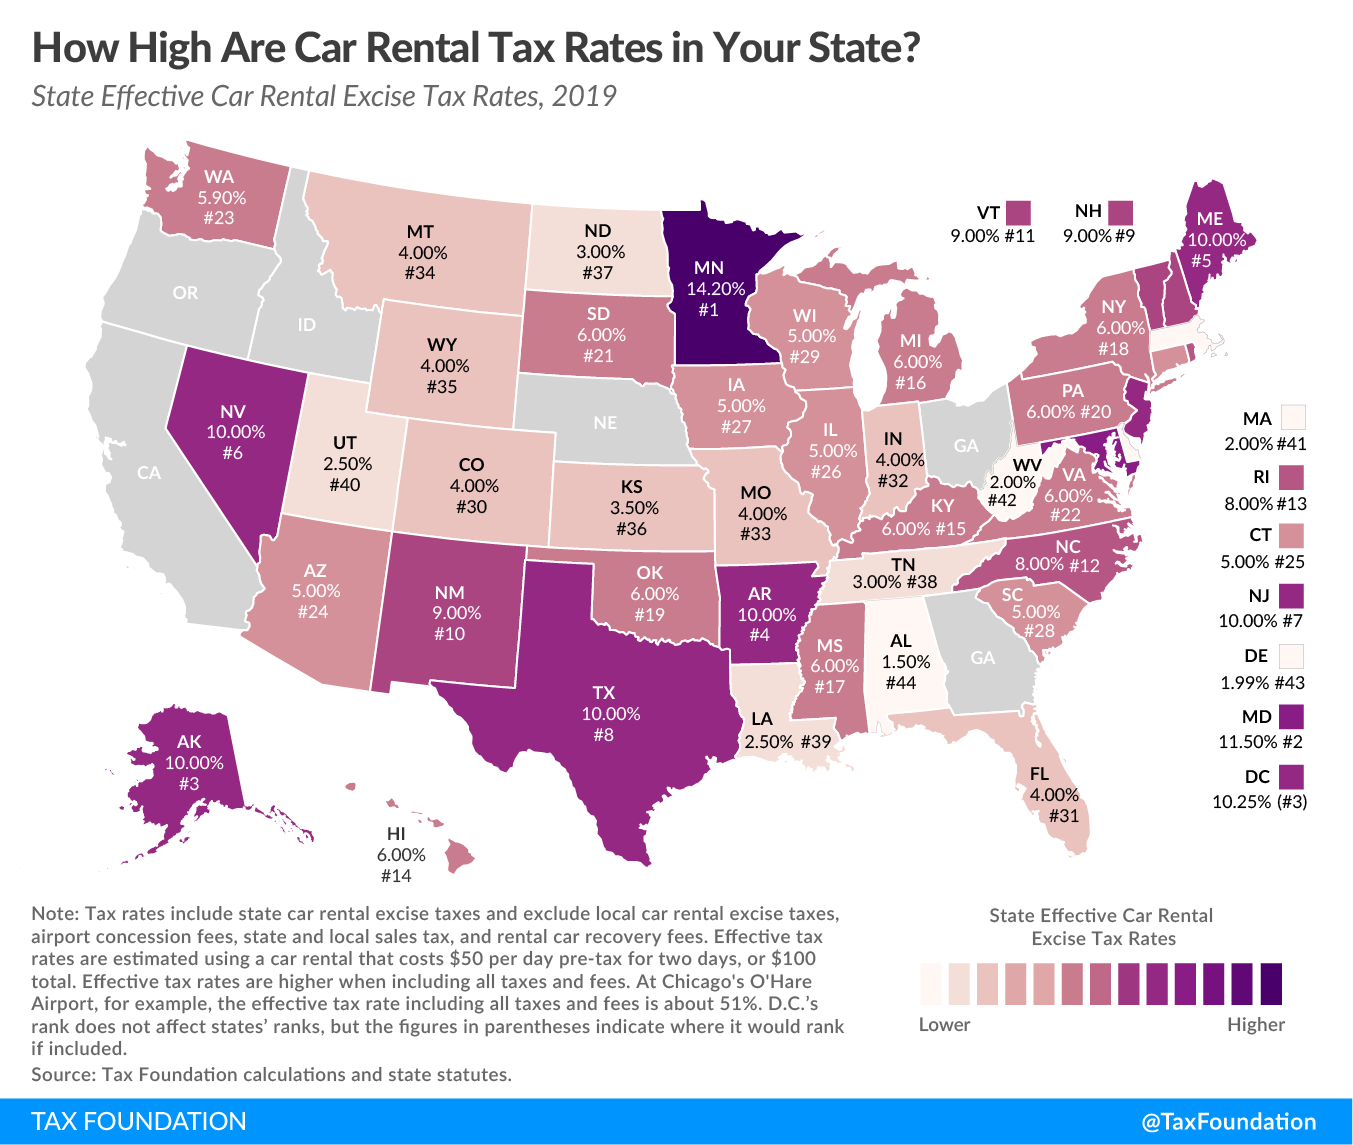 highest car rental tax rates in your state? rental car taxes, rental car excise taxes, peer-to-peer car-sharing